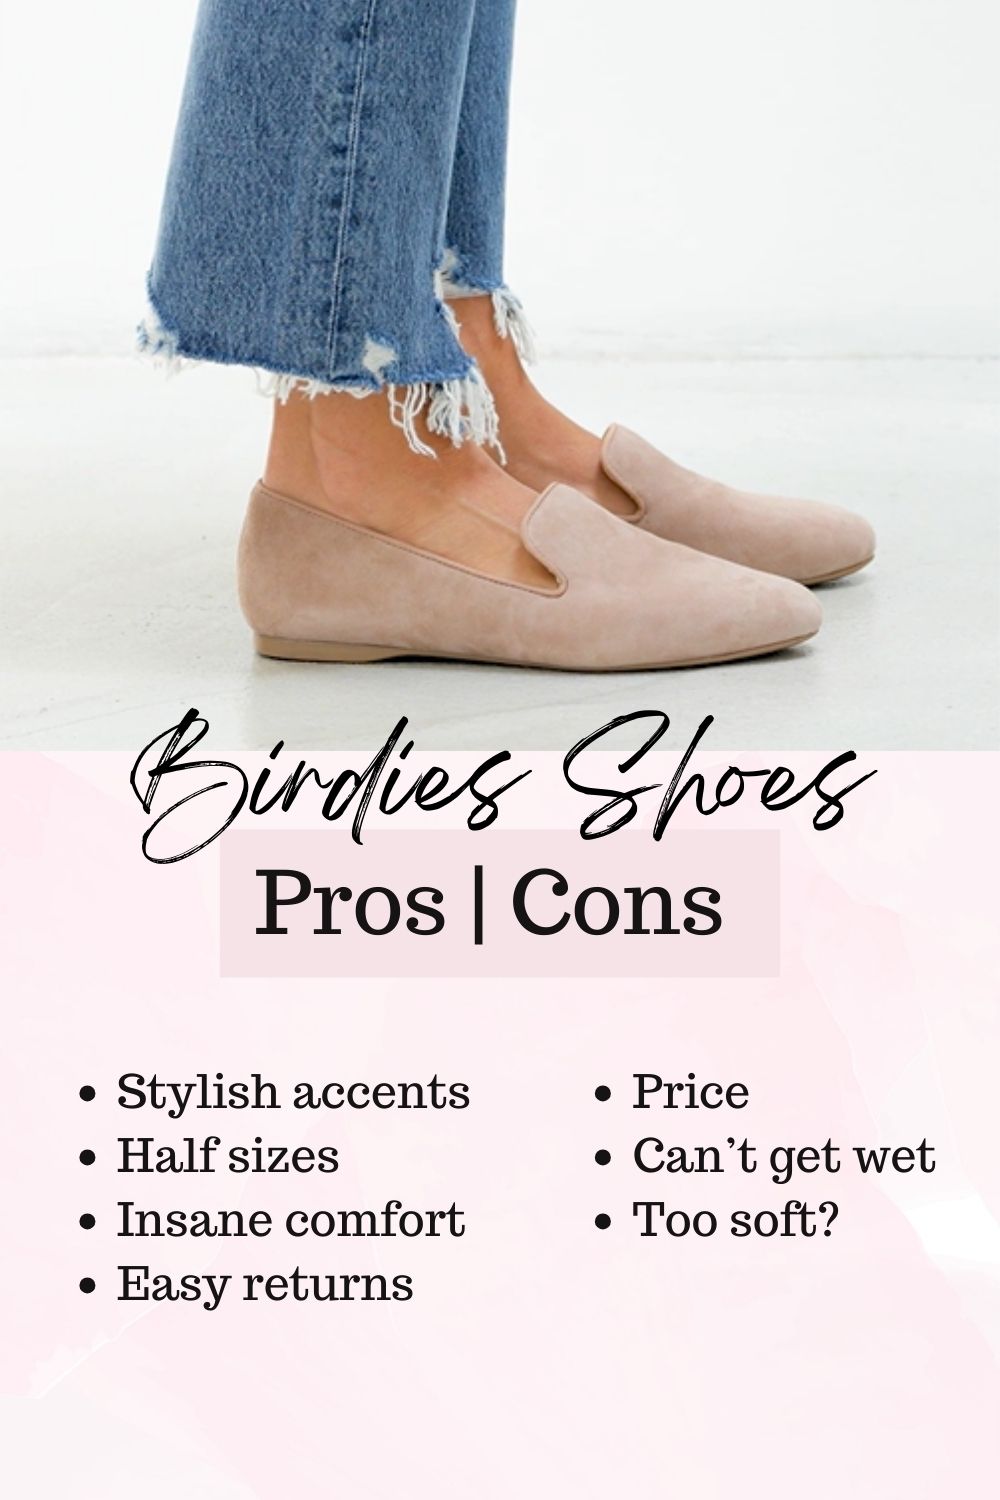 Birdies Shoes Pros and Cons